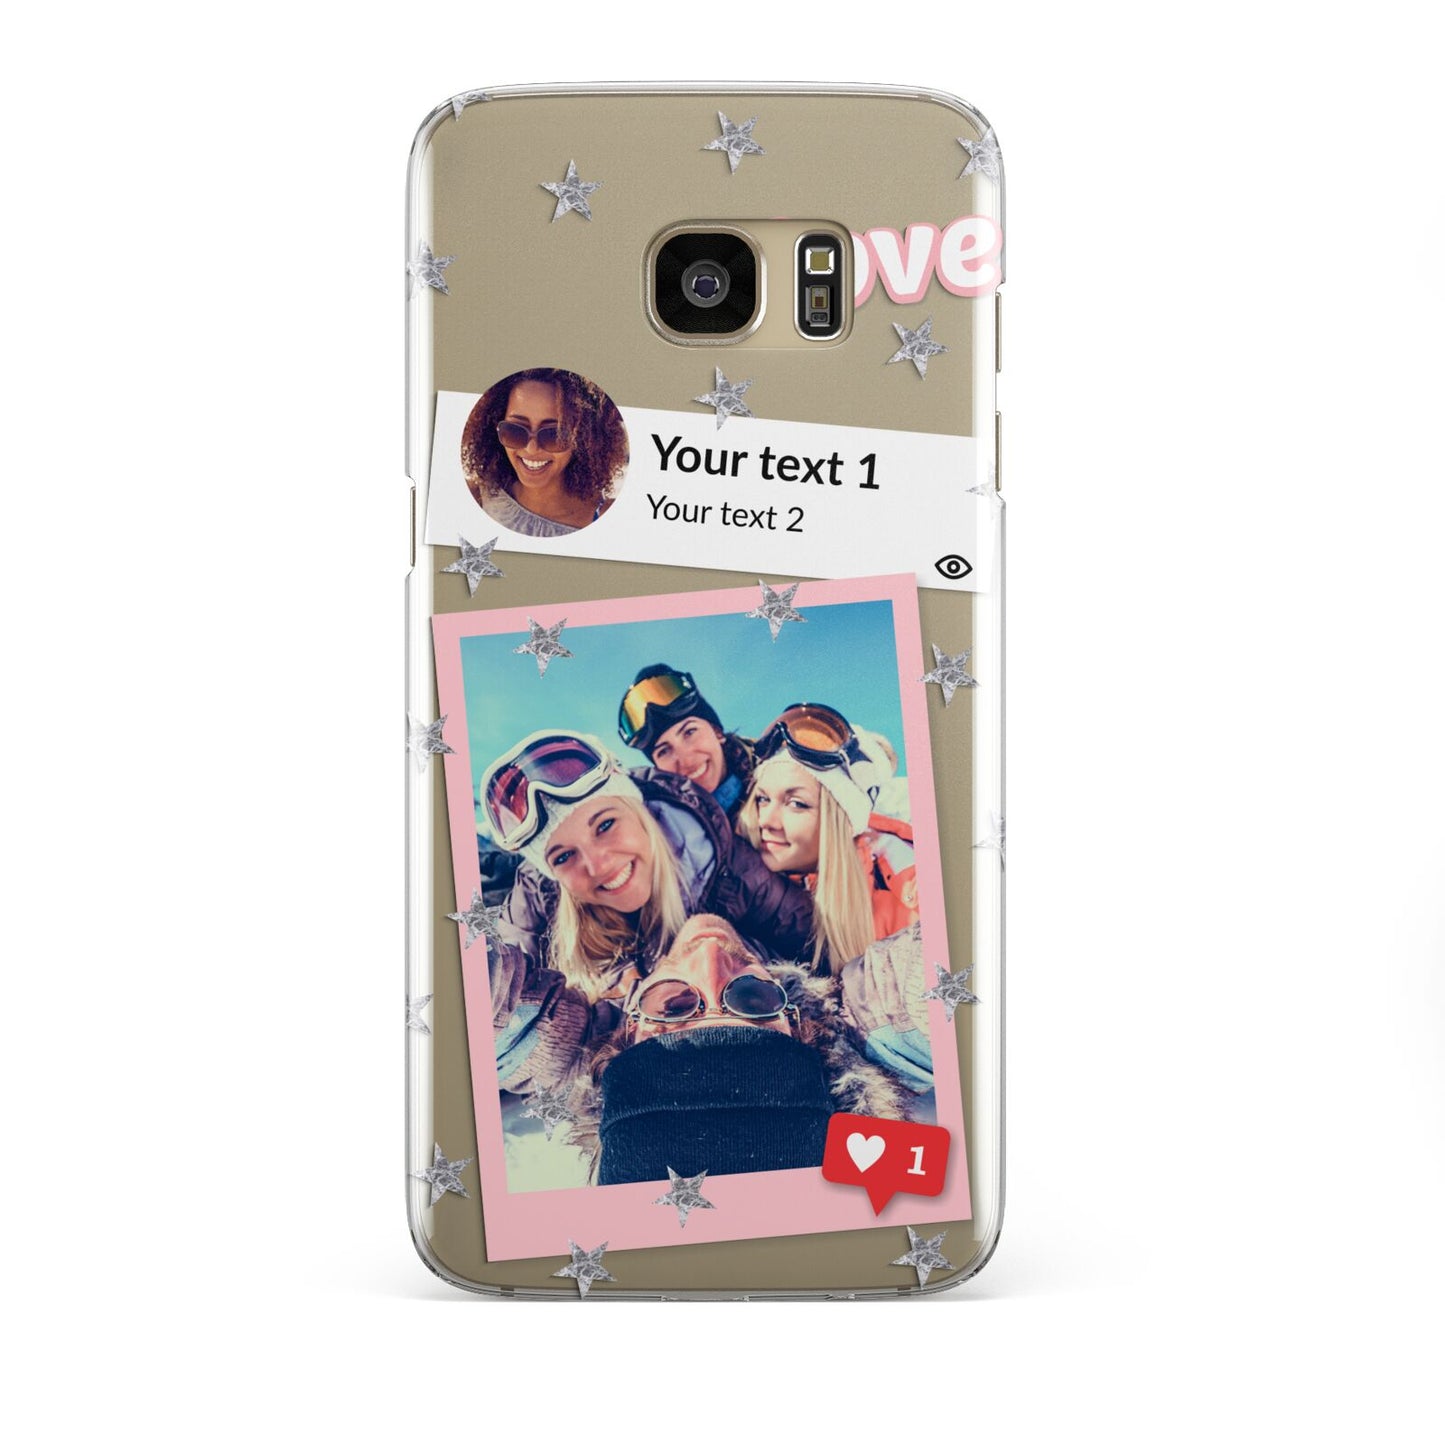 Starry Social Media Photo Montage Upload with Text Samsung Galaxy S7 Edge Case